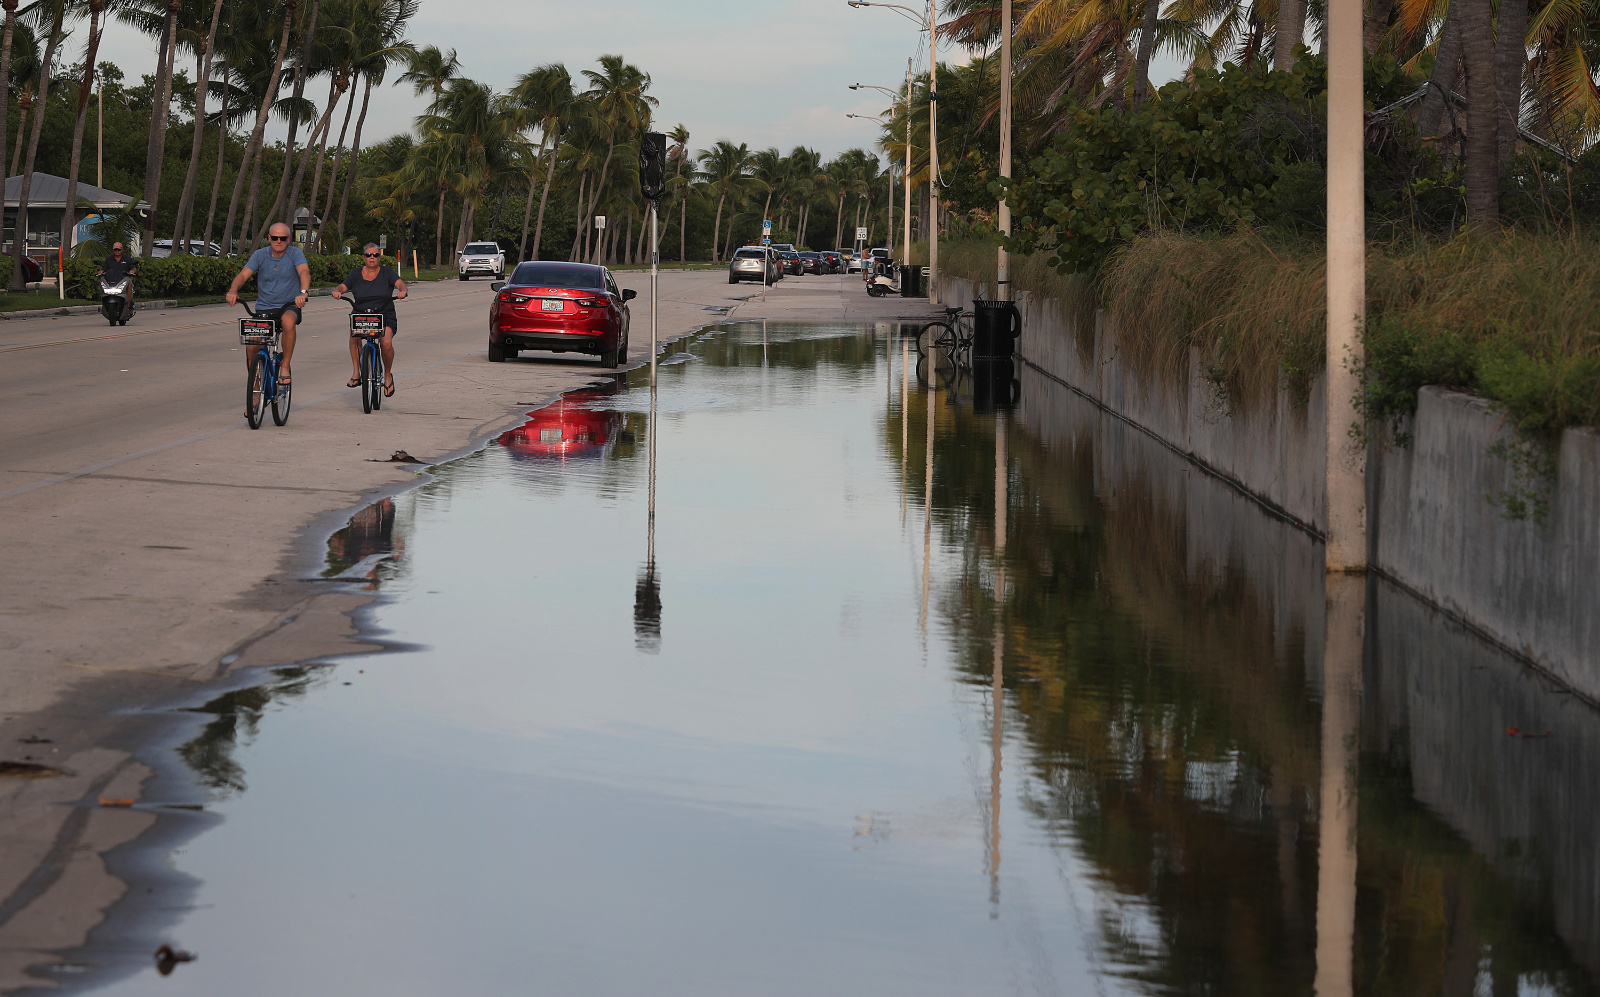 Photo of a flooded street with bikers and palms in the background